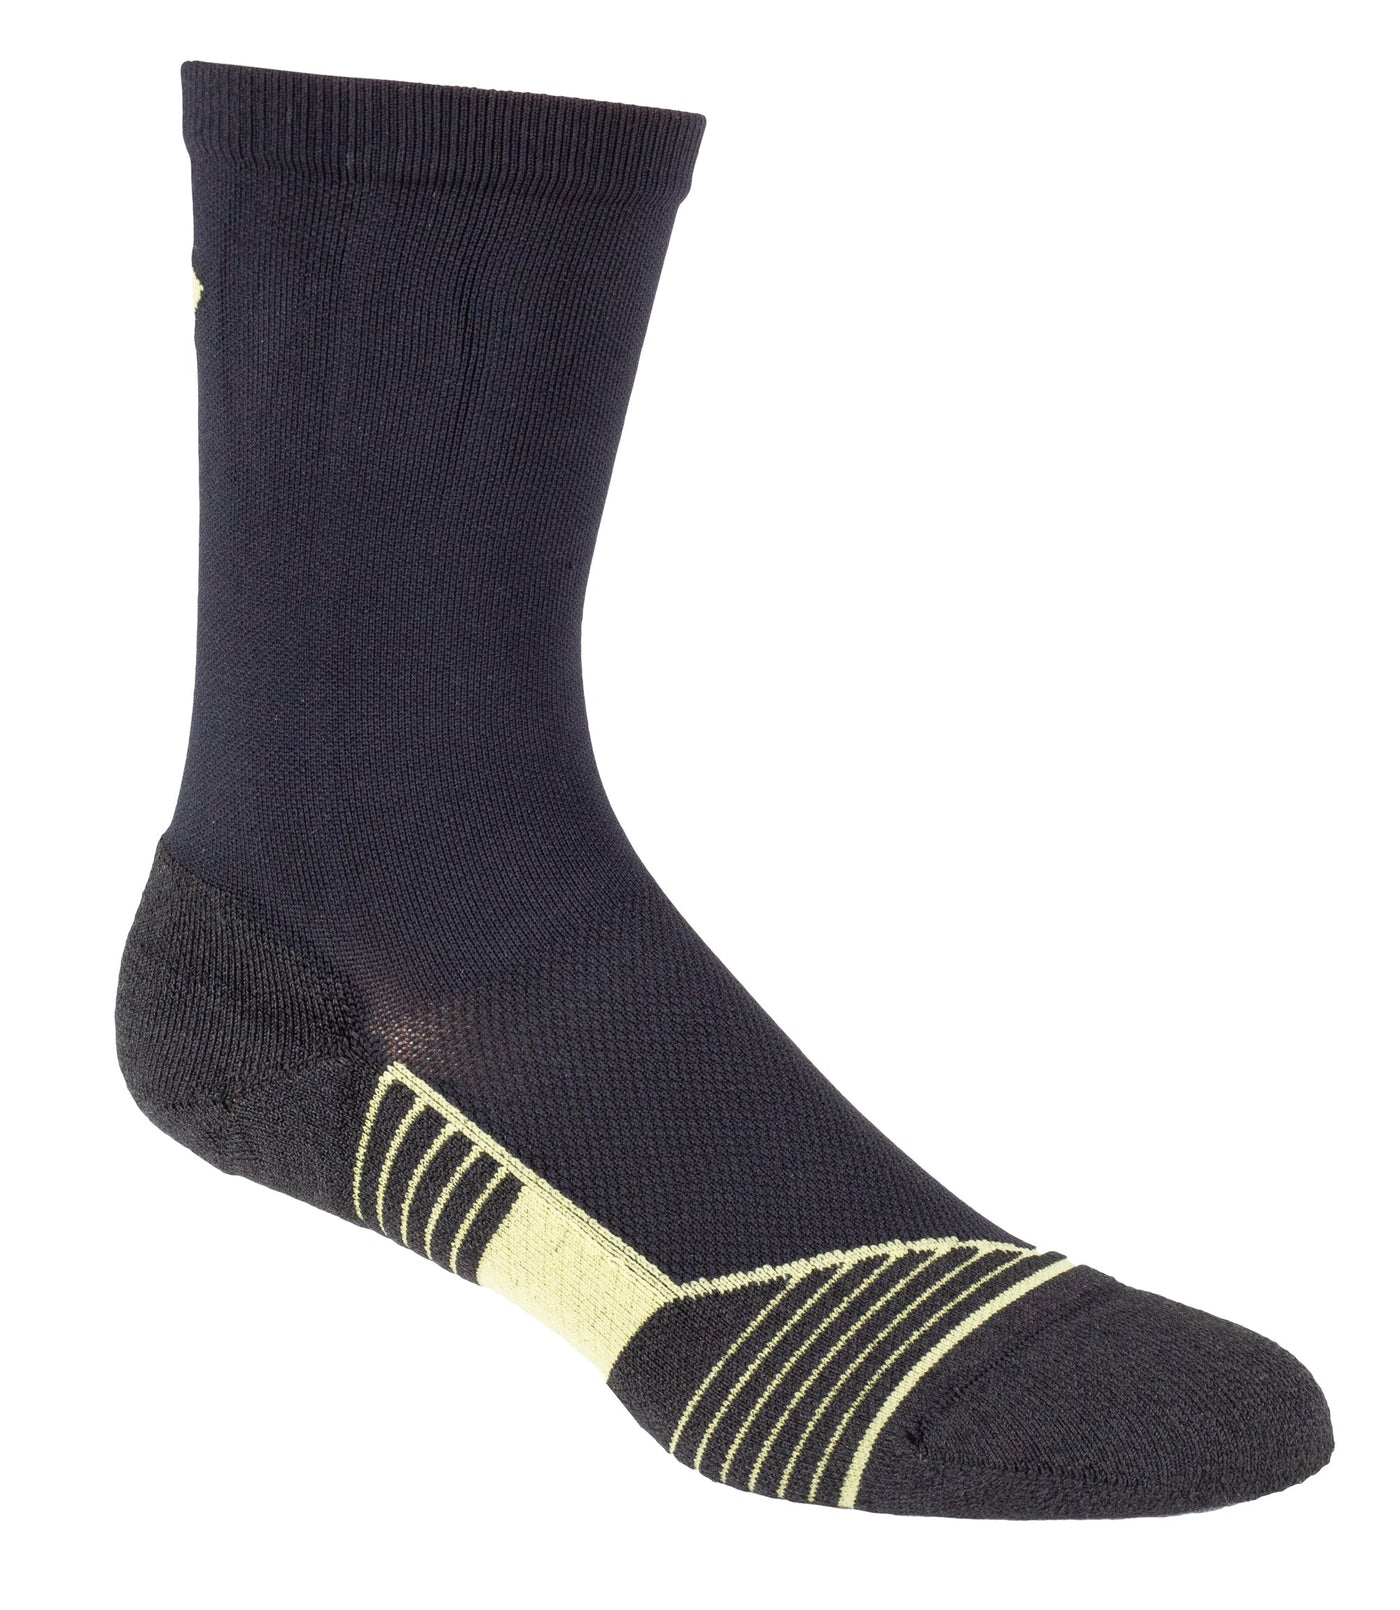 Front of Advanced Fit 6" Sock in Black